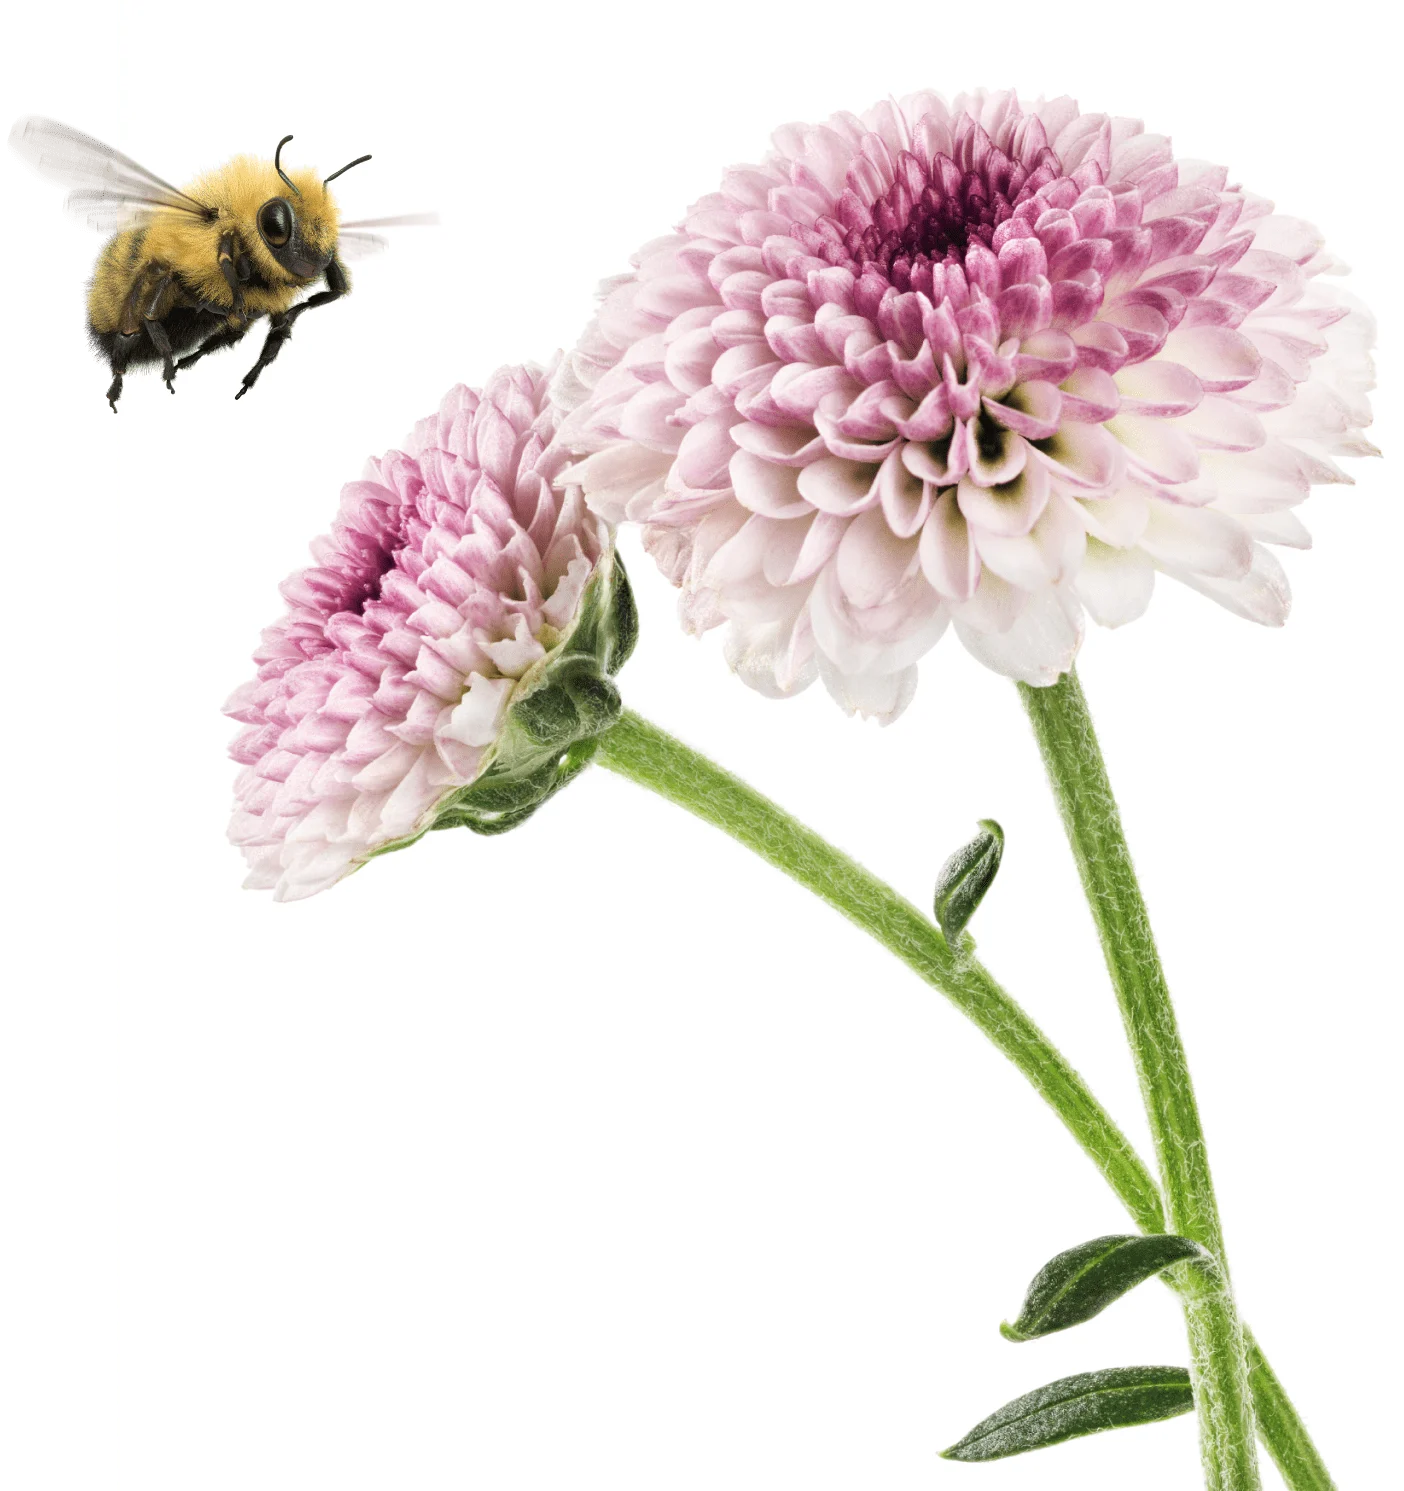 A bee flying above two white and pink flowers.